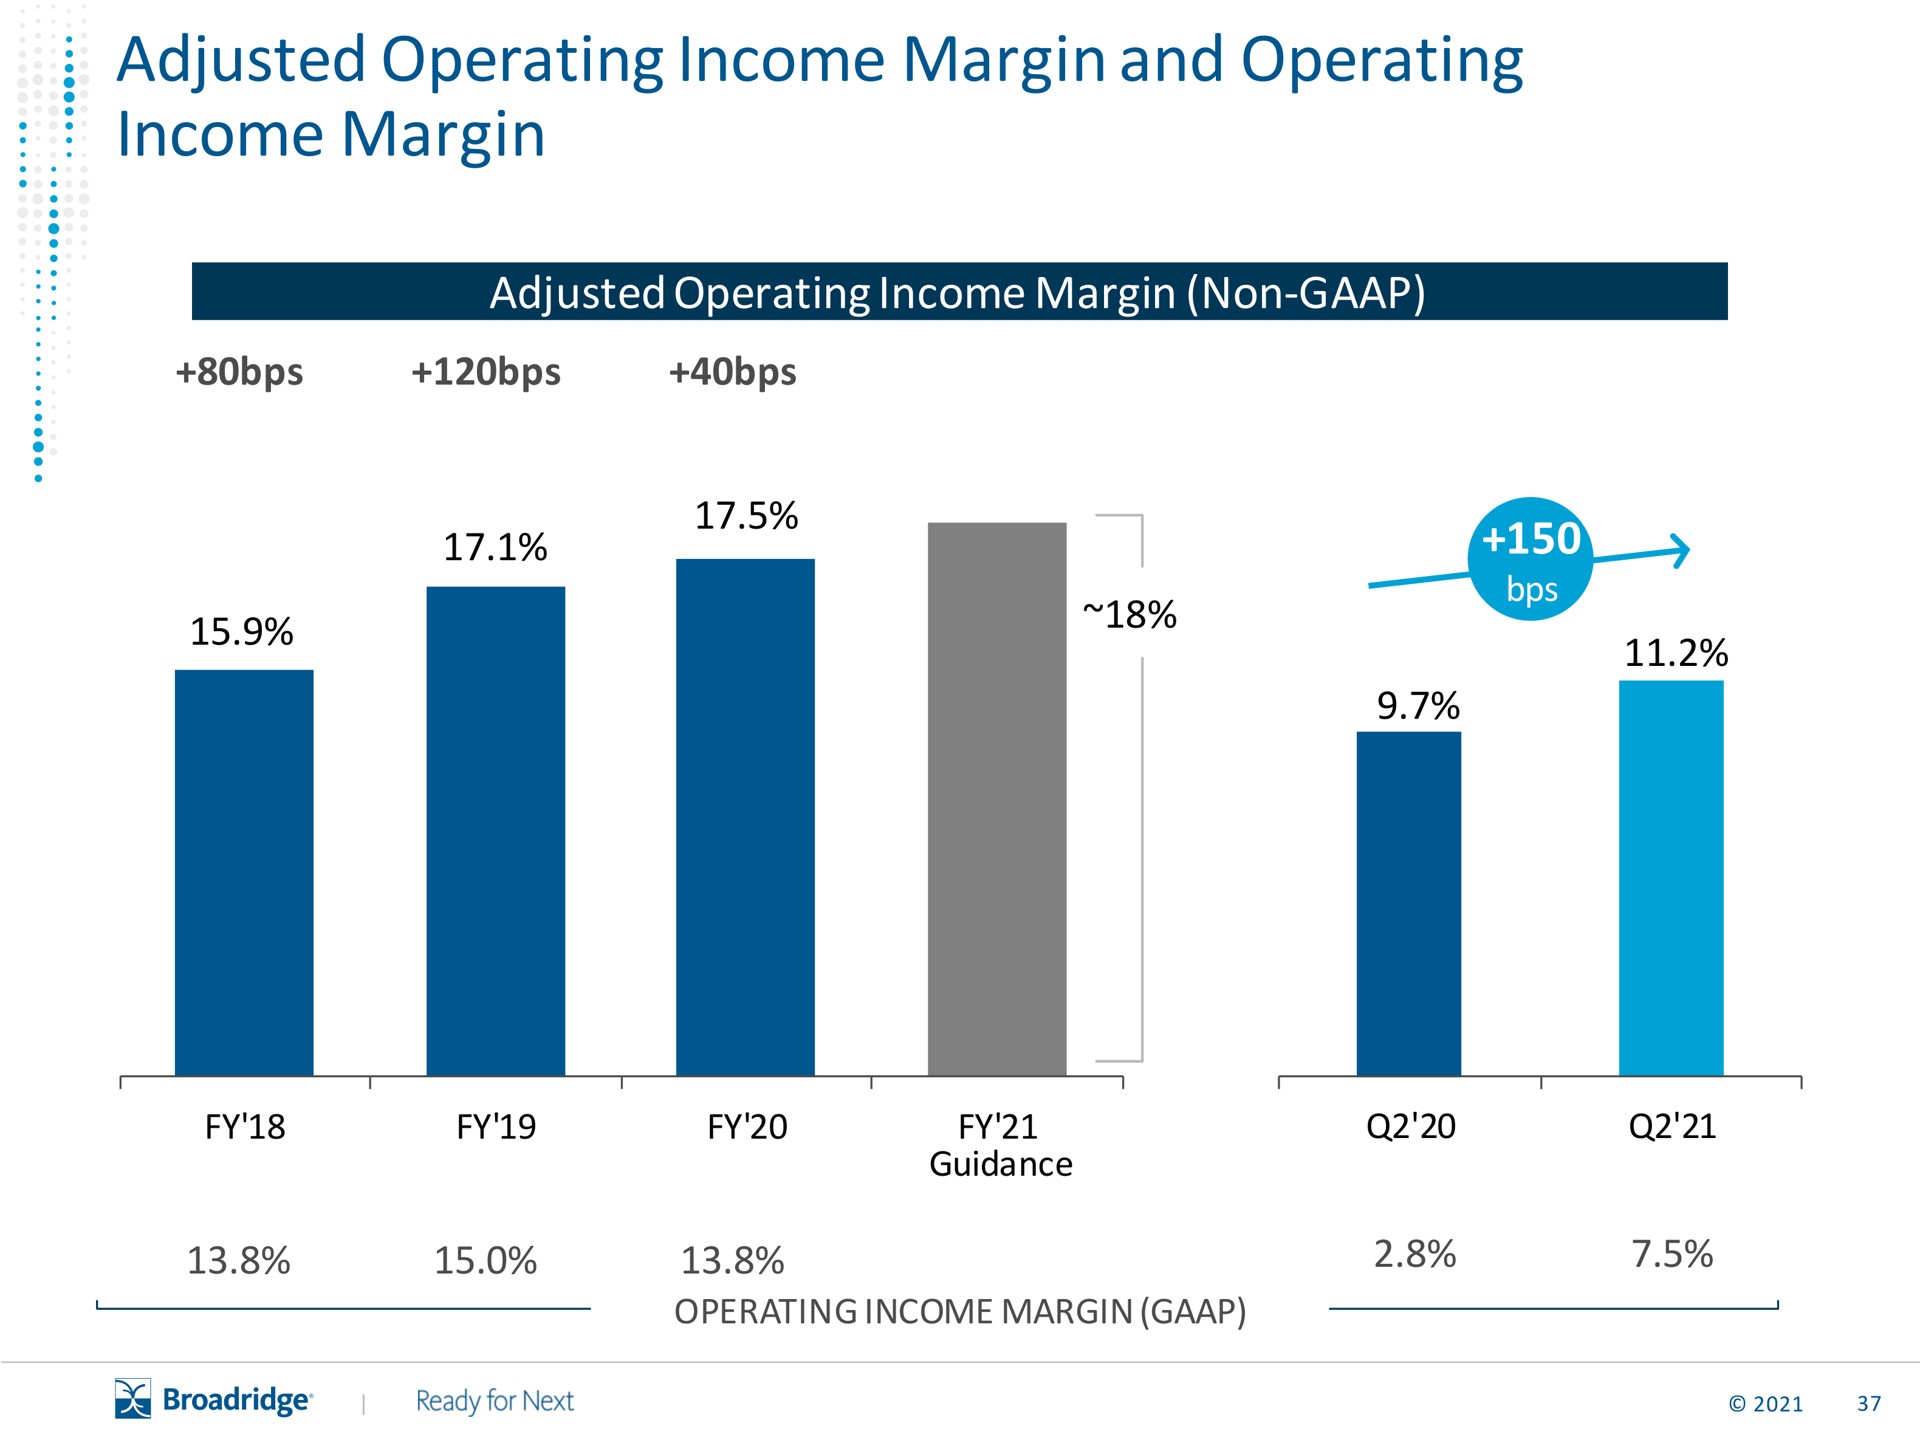 adjusted operating income margin and operating income margin | Broadridge Financial Solutions